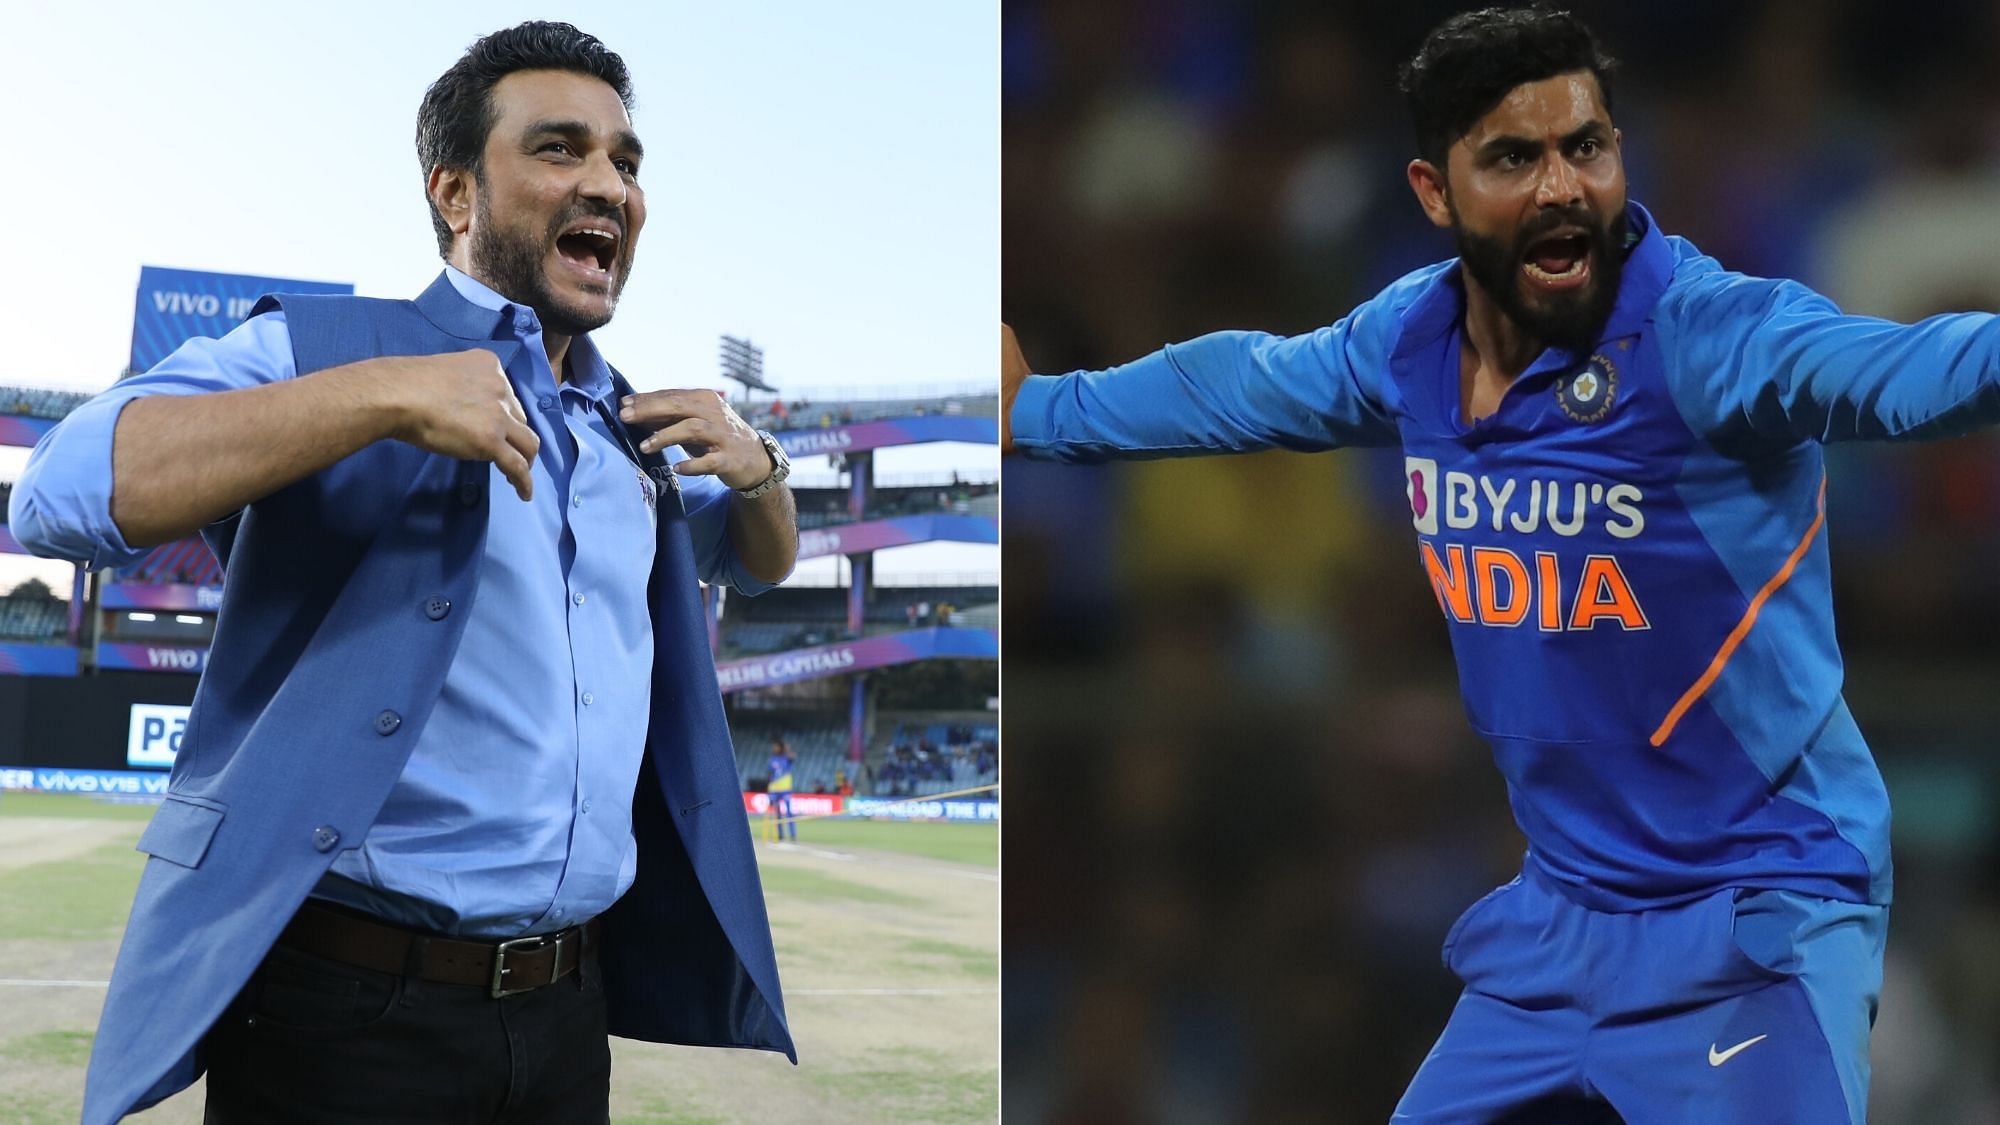 All-rounder Ravindra Jadeja and cricketer-turned commentator Sanjay Manjrekar were involved in yet another Twitter banter following India’s emphatic win over New Zealand in the second T20I of the ongoing five-match series.